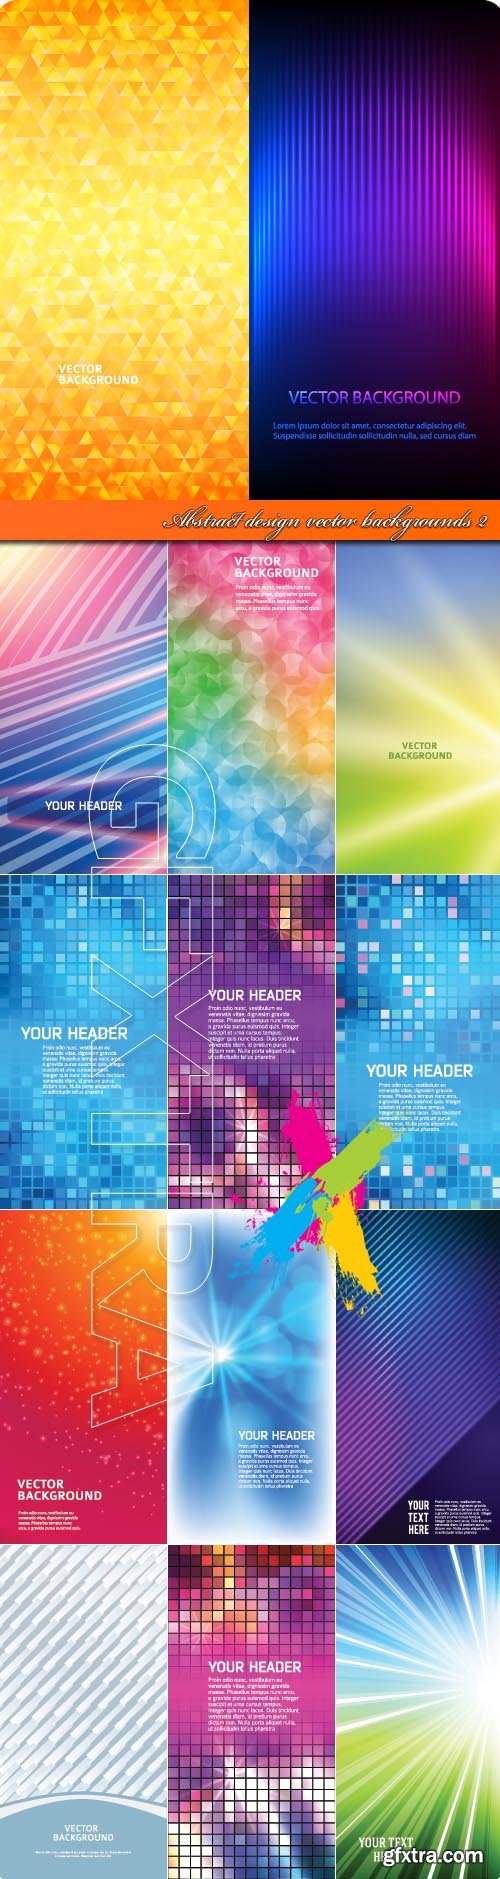 Abstract design vector backgrounds 2